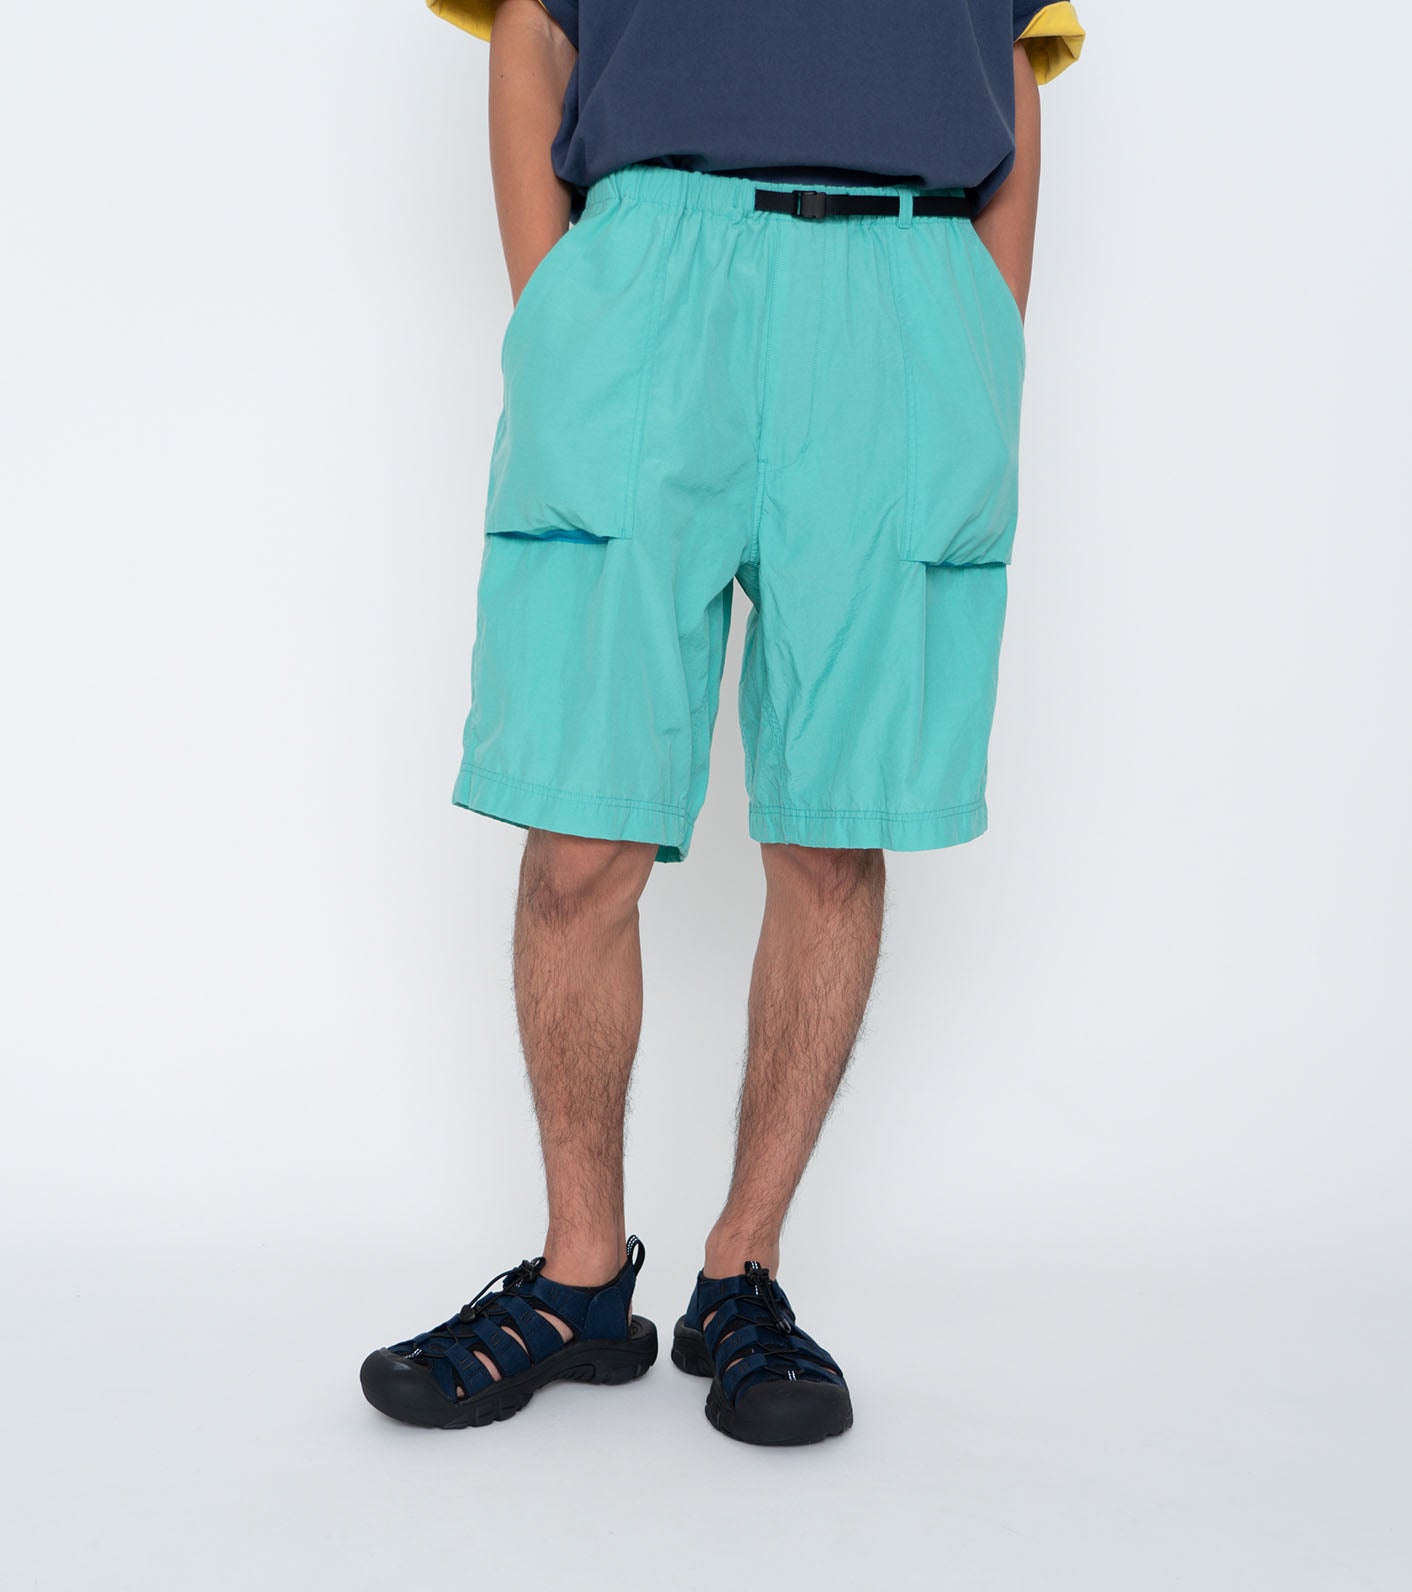 THE NORTH FACE PURPLE LABEL Field River Shorts